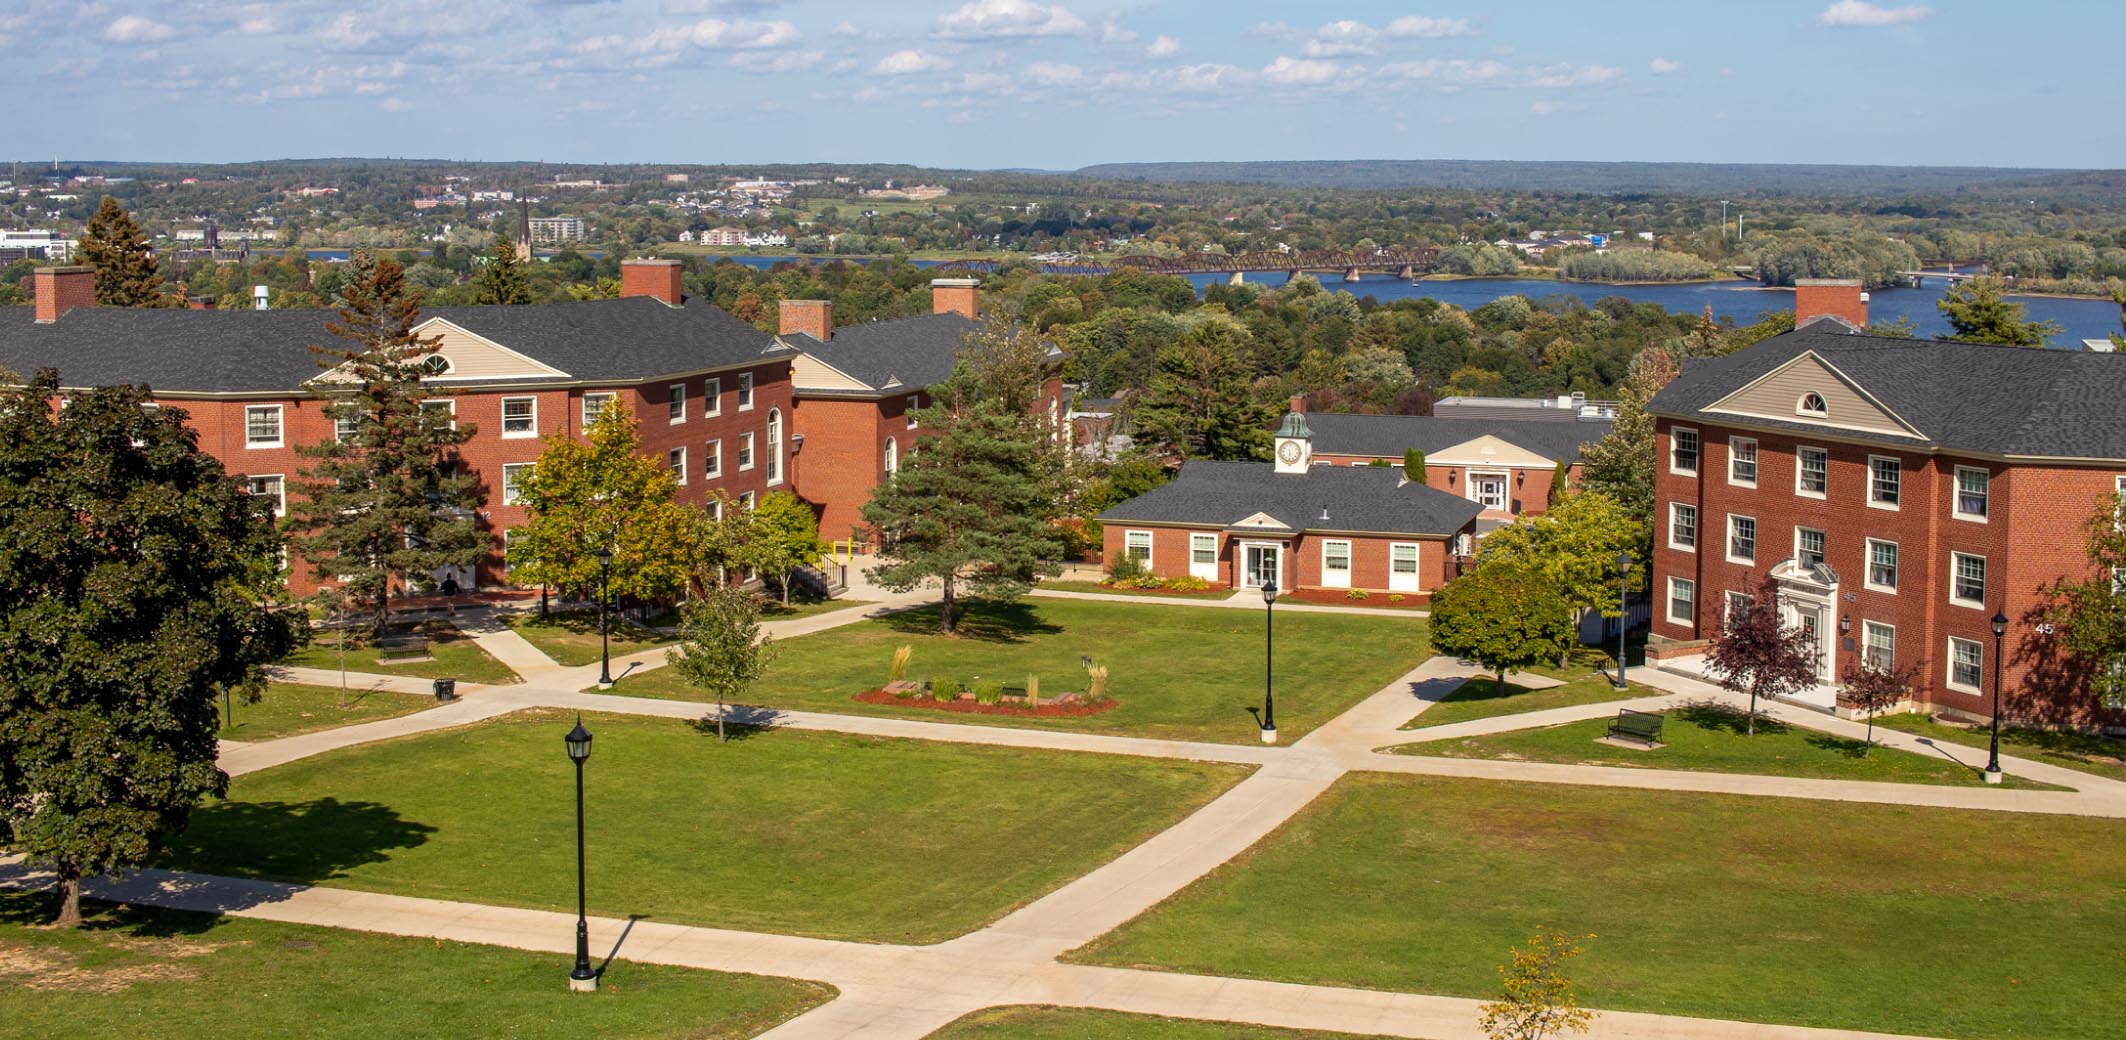 Photo of the University of Fredericton campus